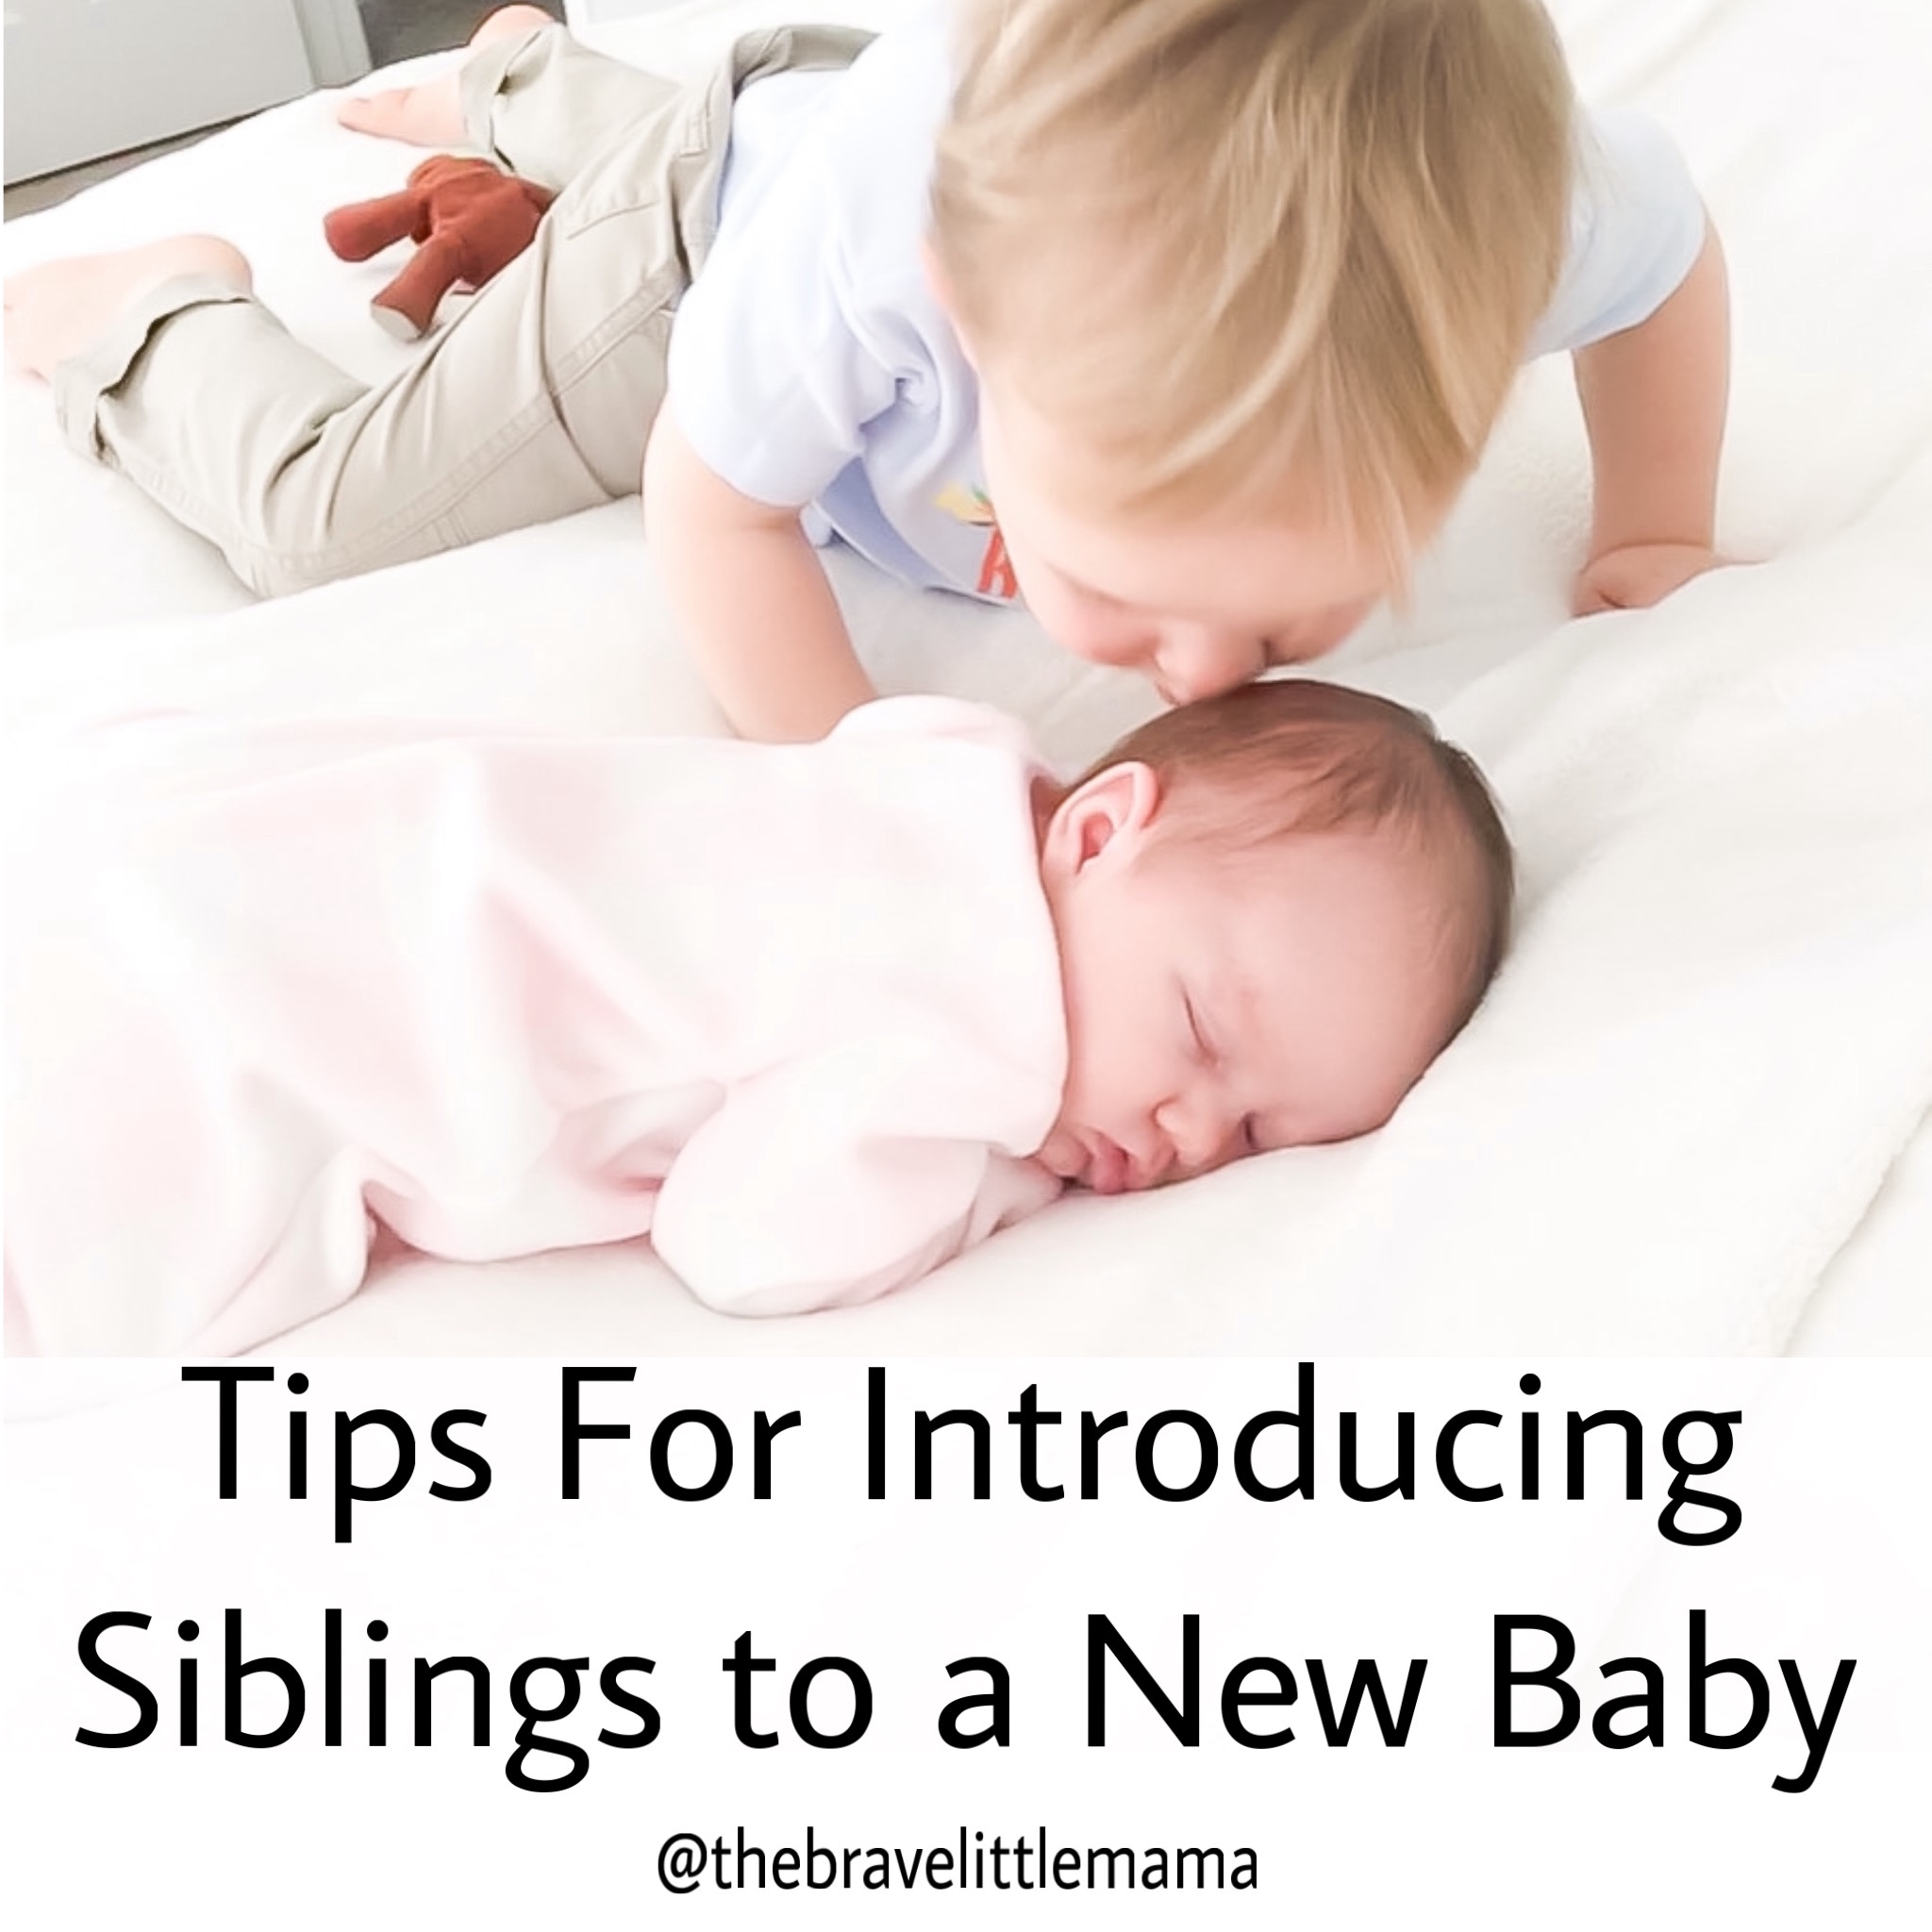 Introducing New Baby to Siblings